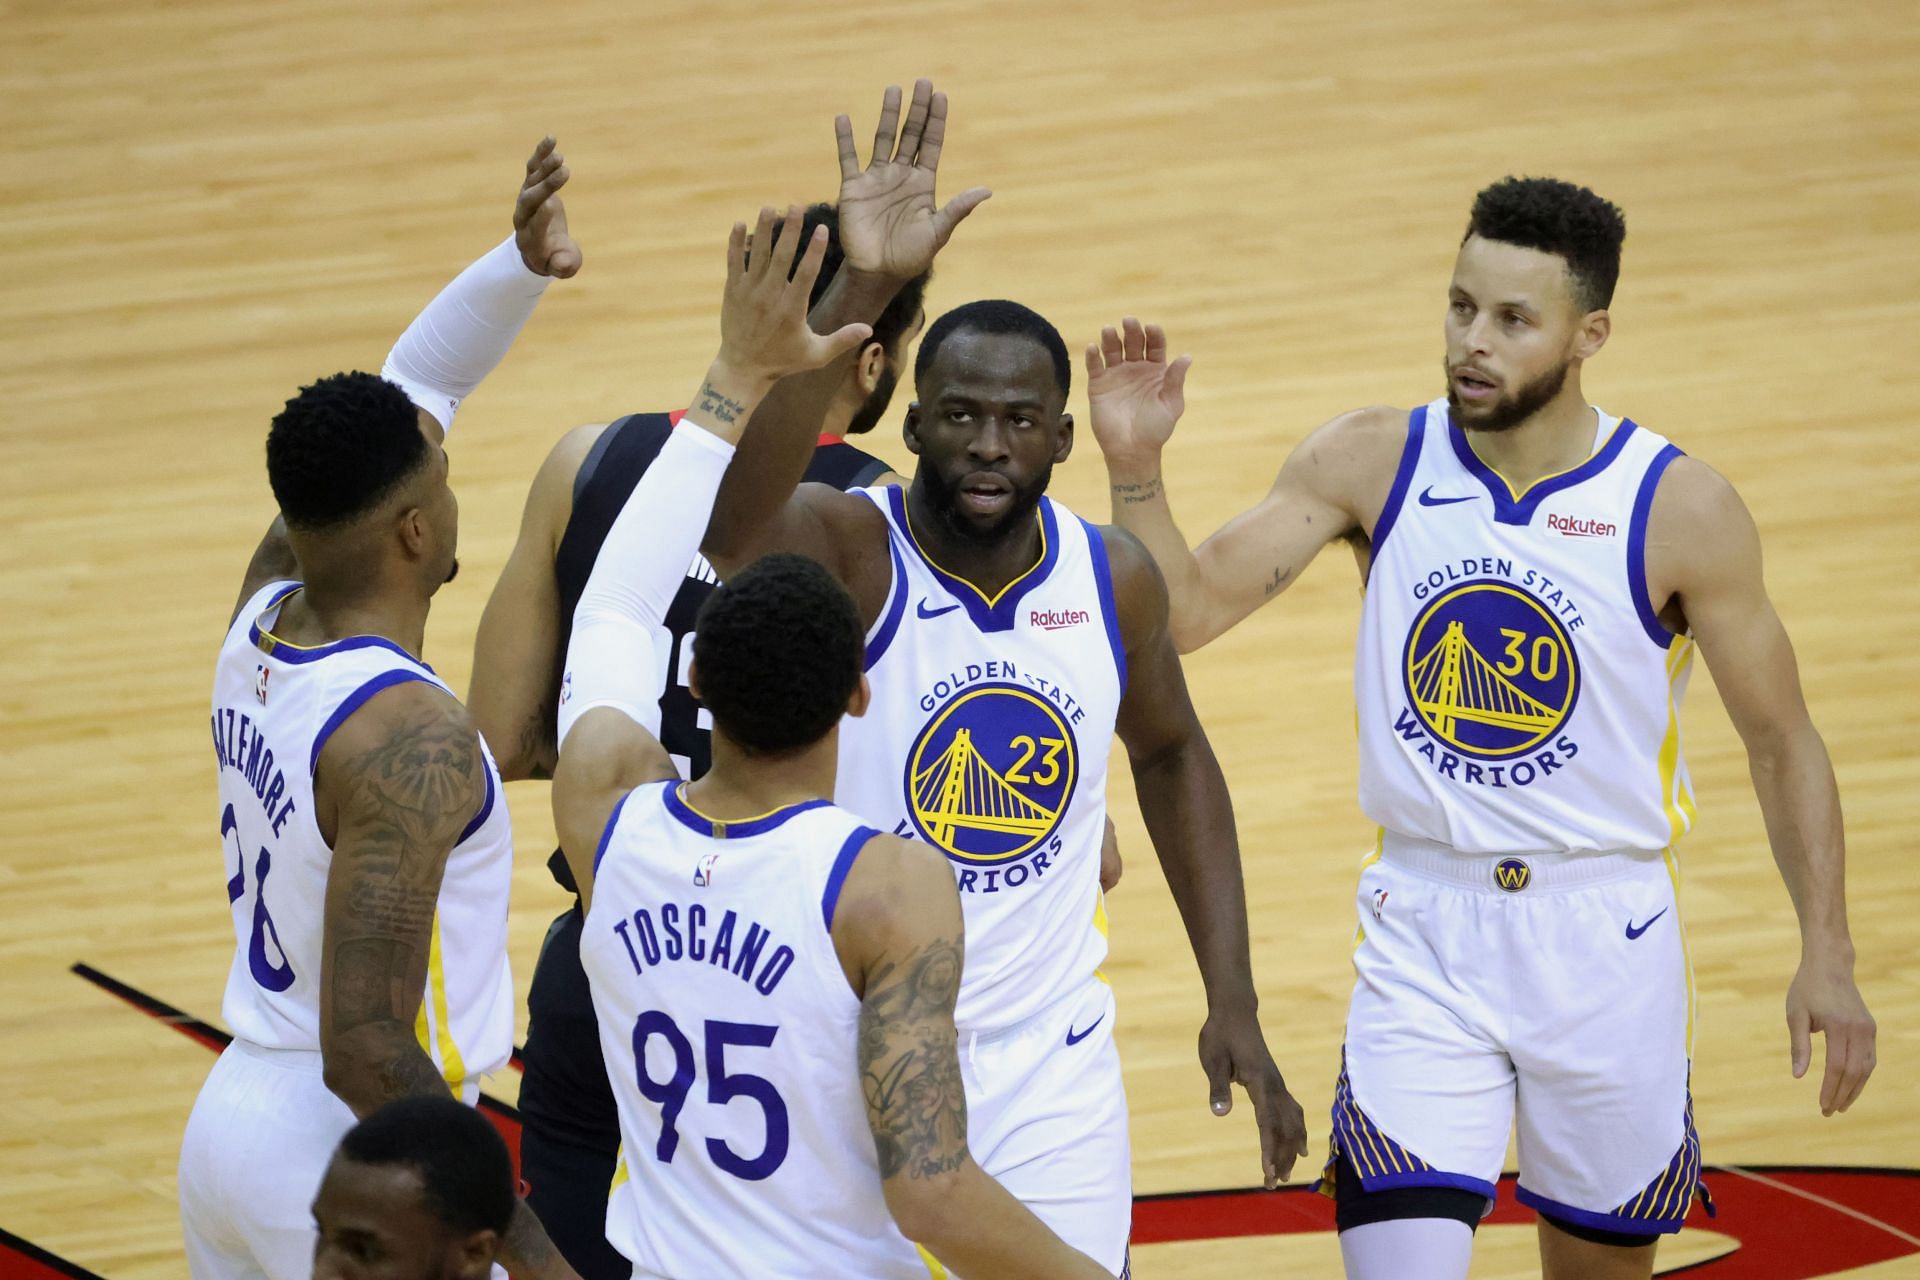 The Golden State Warriors have won their first two games of the 2021-22 NBA season.